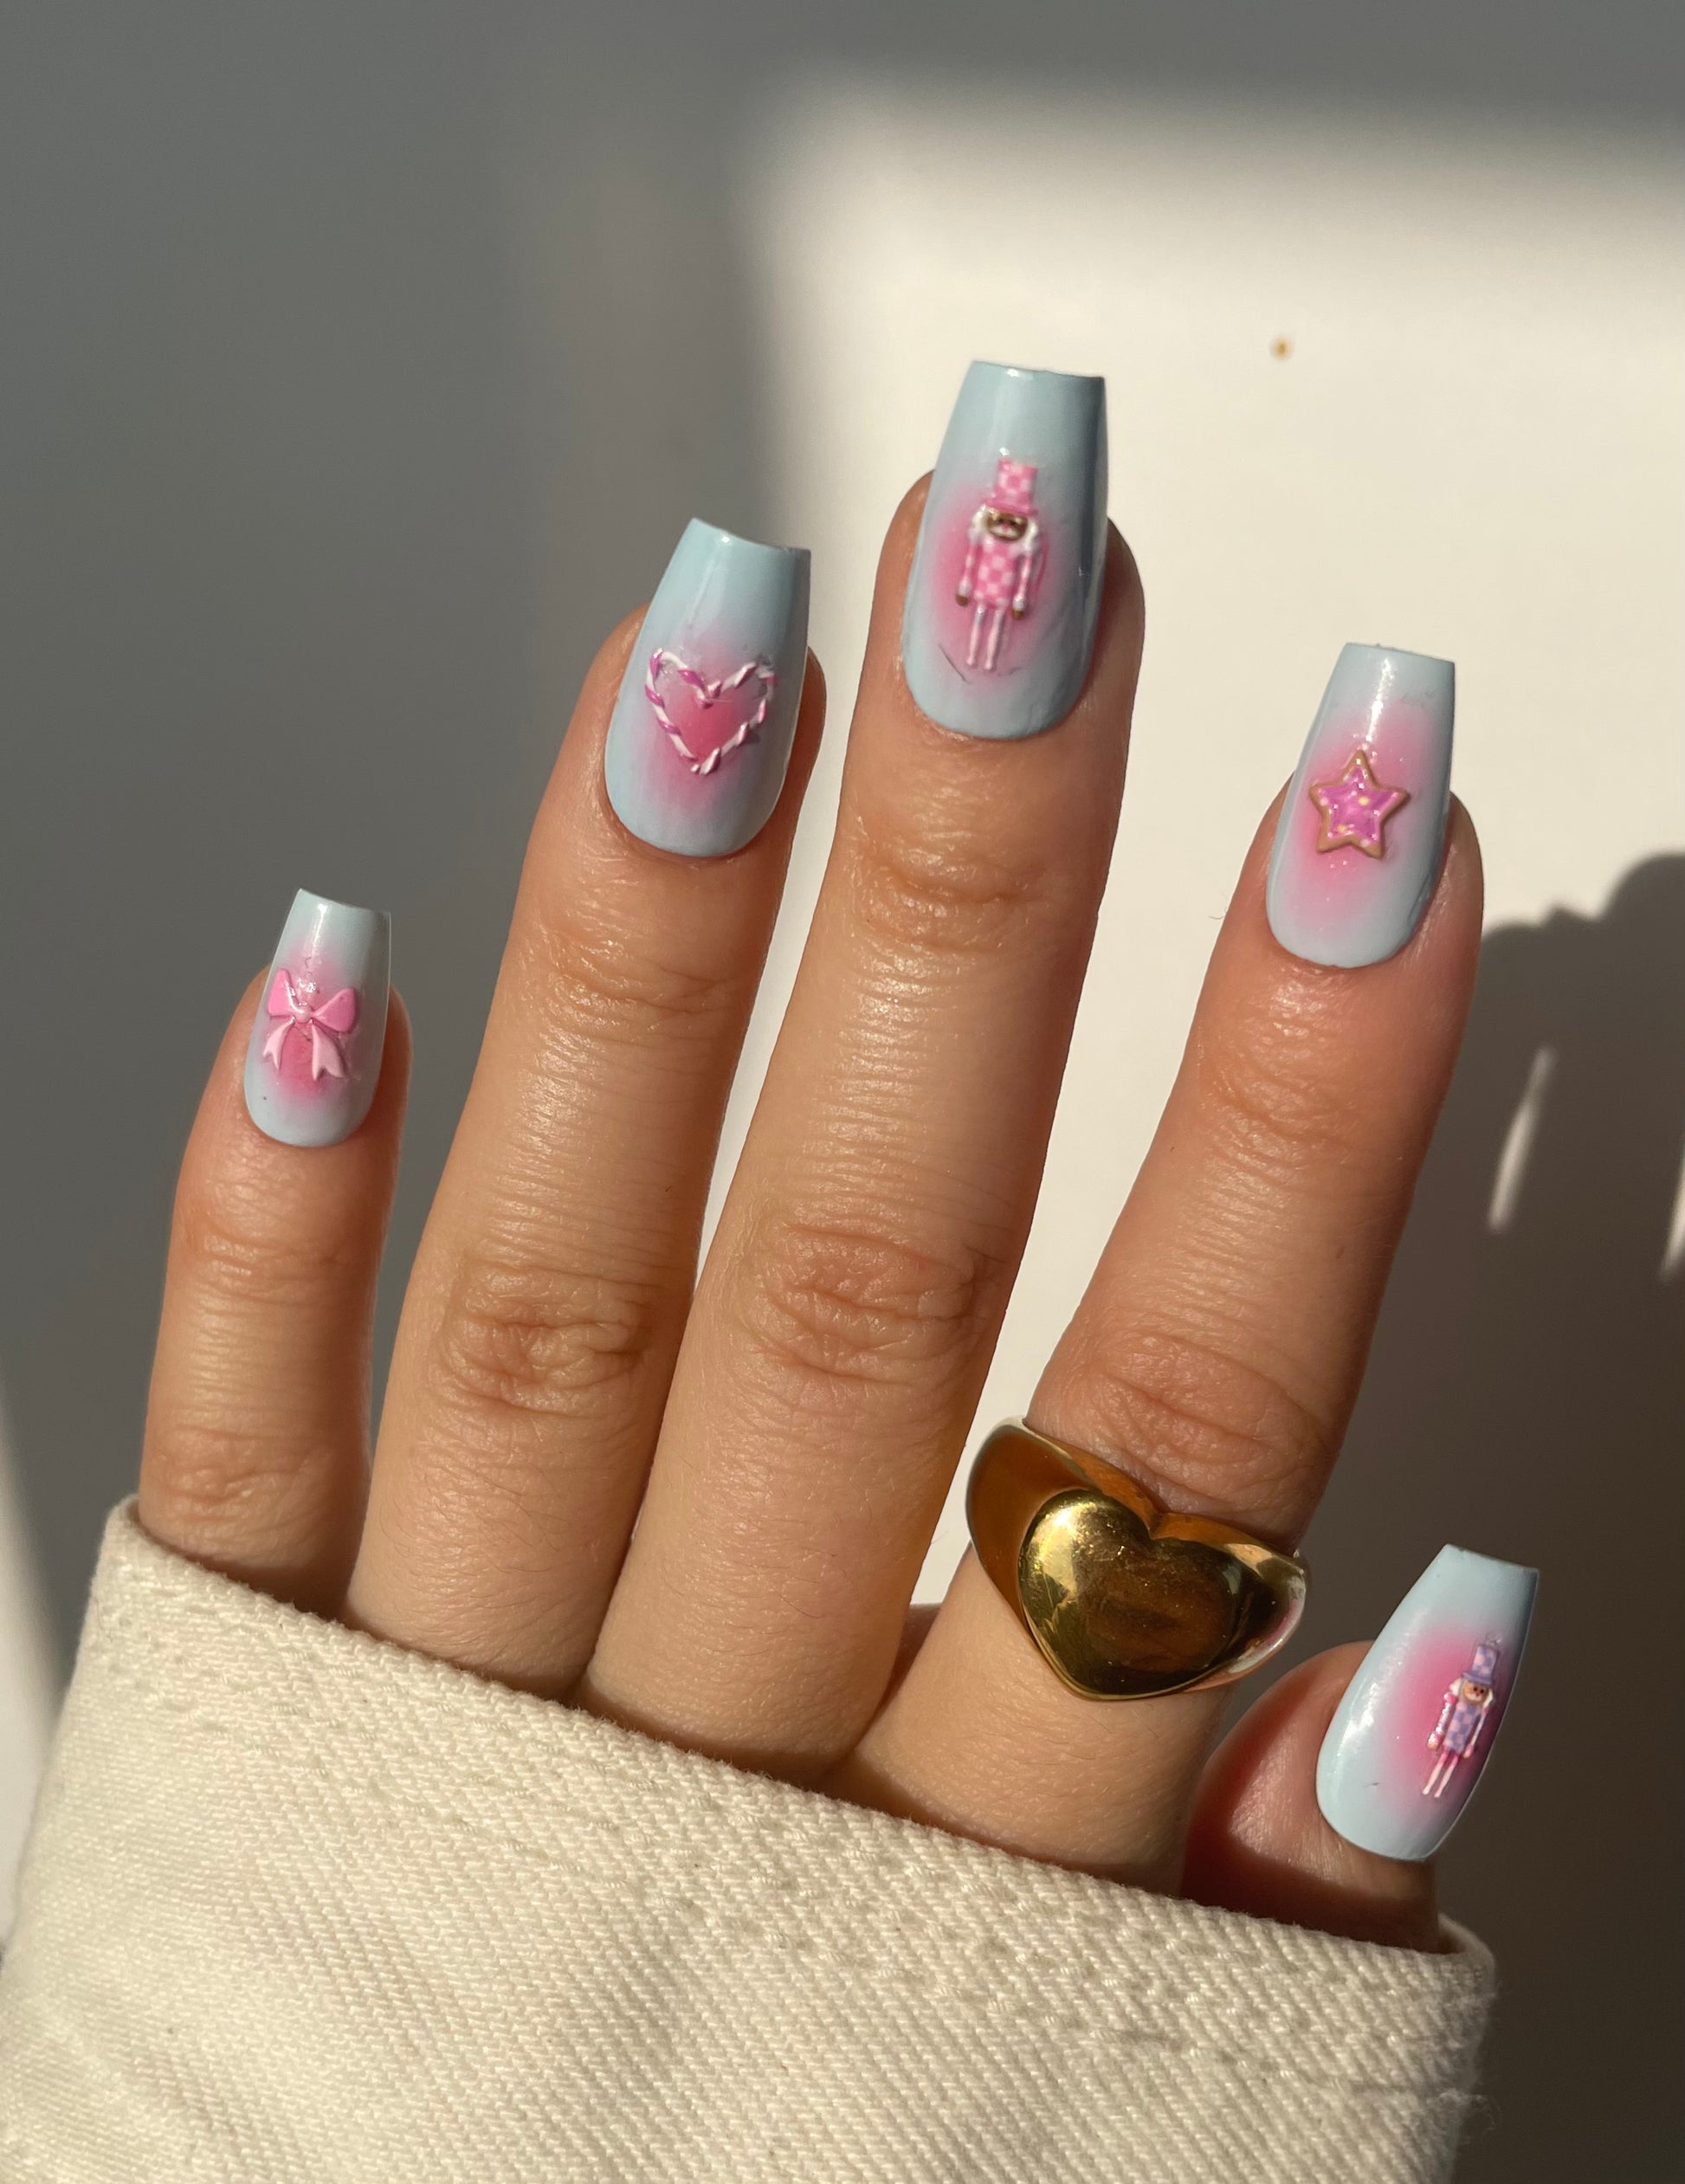 Gingerbread men stickers on blue nails